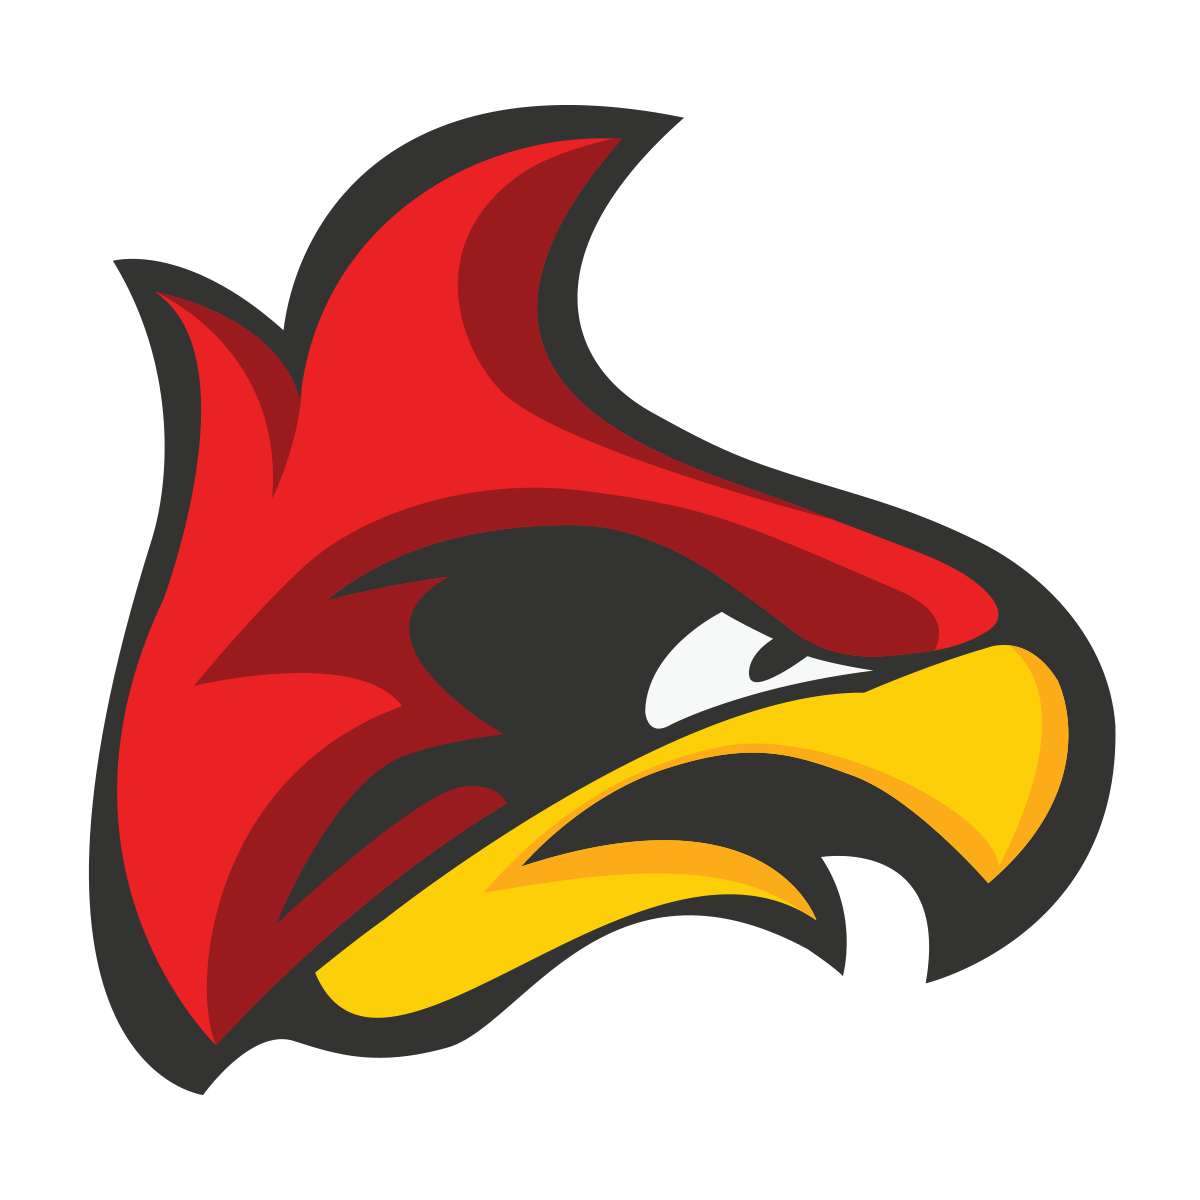 NFL Cardinals Logo - Cards Wire | Get the latest Cardinals news, schedule, photos and ...